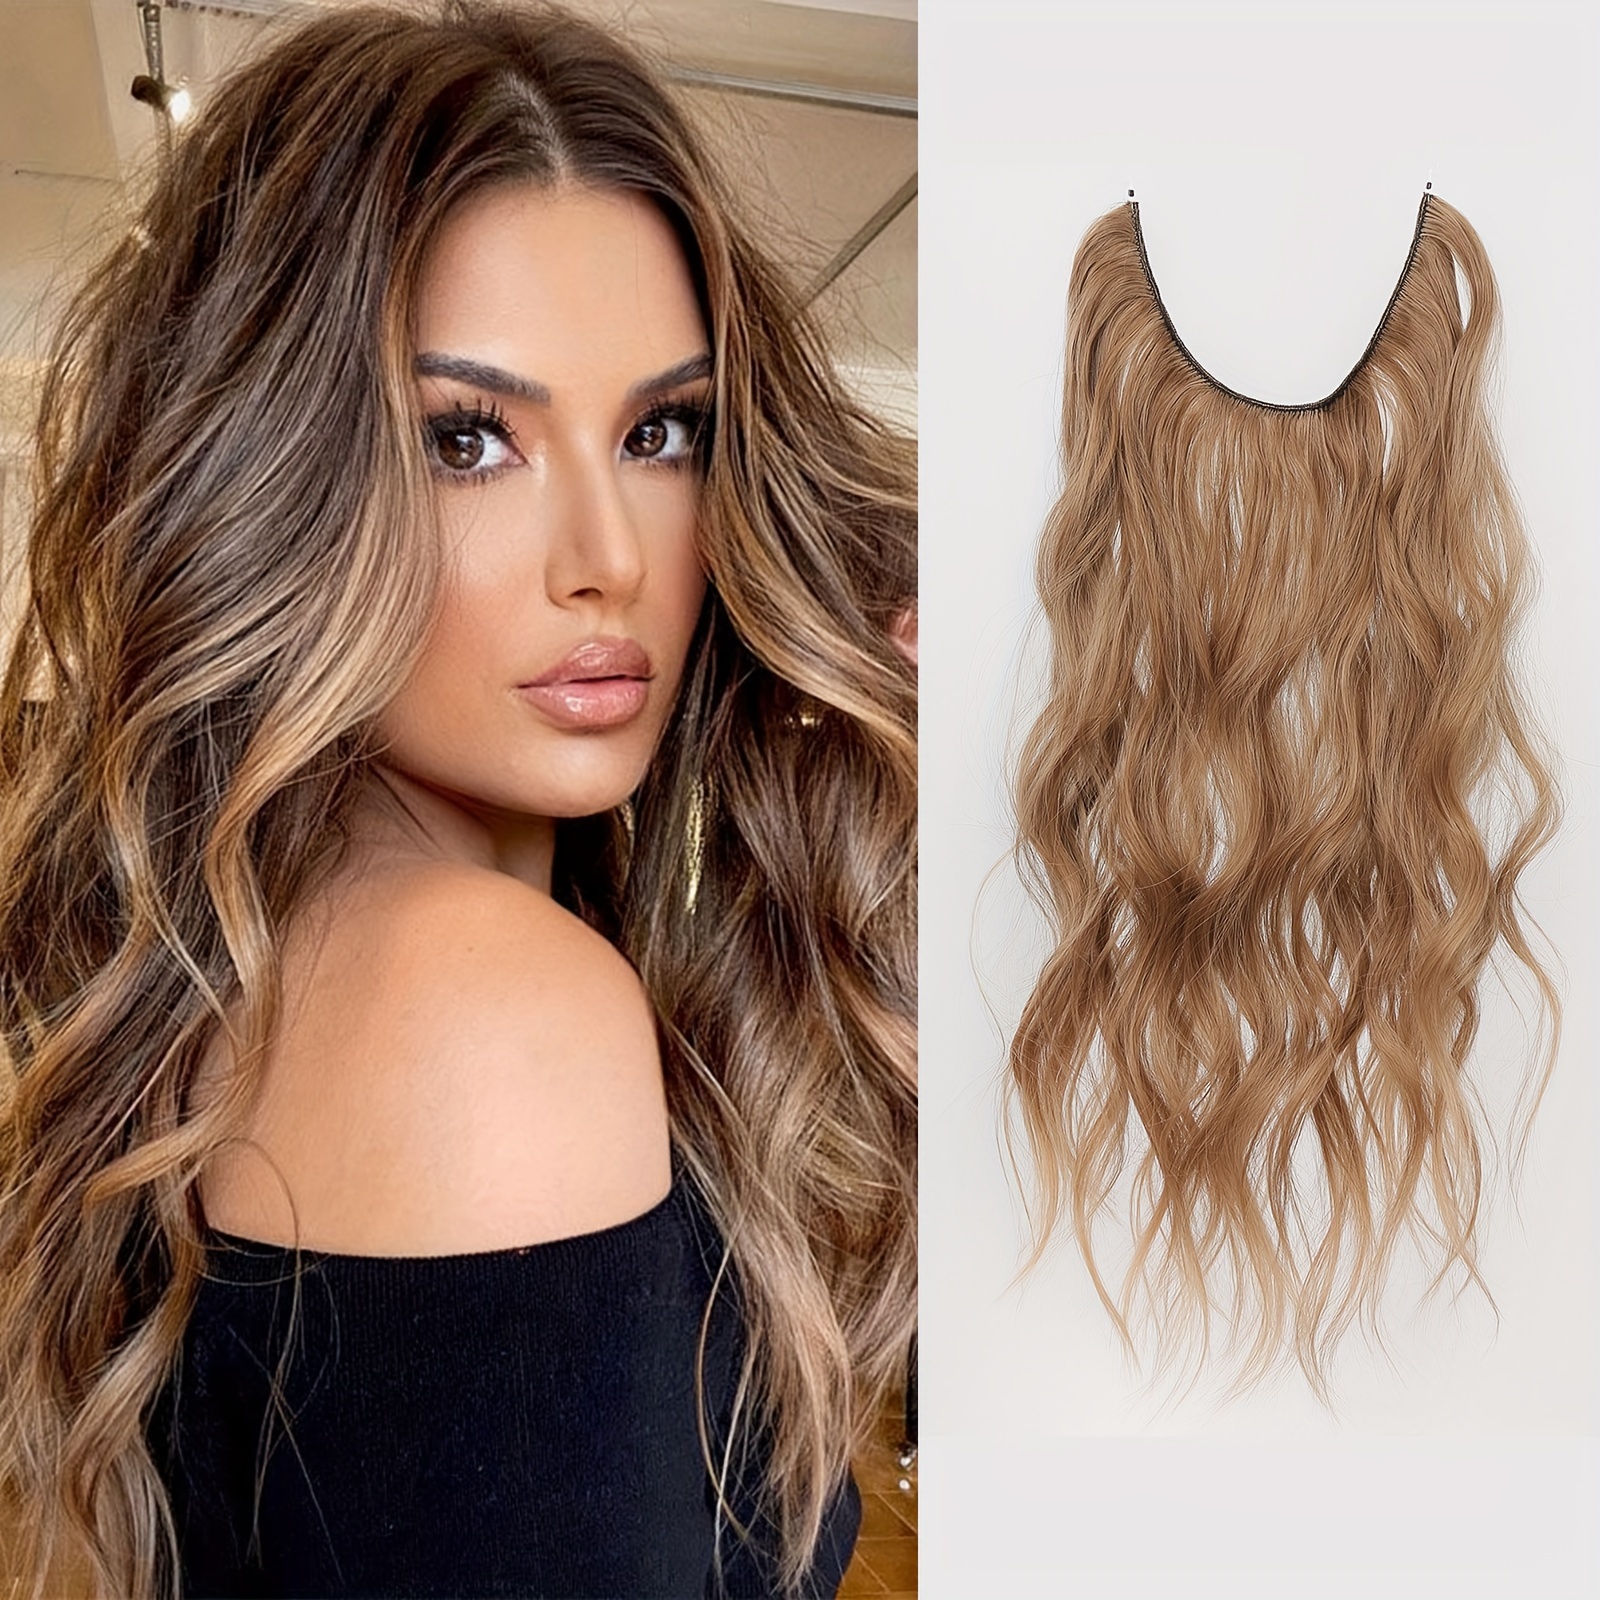 Invisible Wire Hair Extension with Adjustable Size Transparent Headband Long Curly Wavy Synthetic Hair Light Brown Mix Blonde Long Wavy Secret Hair